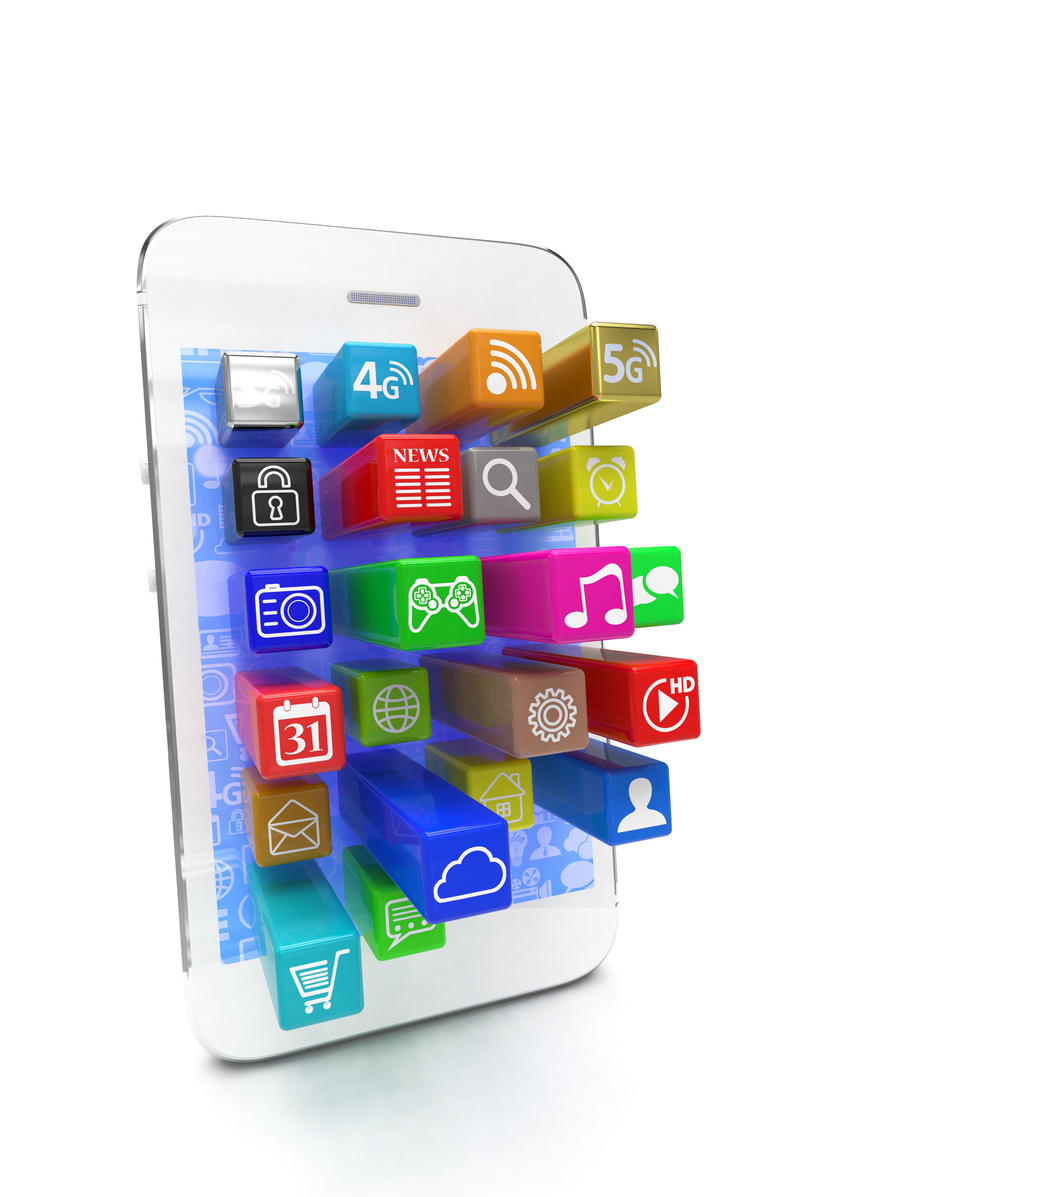 application software icons extruding from smartphone, isolated on white